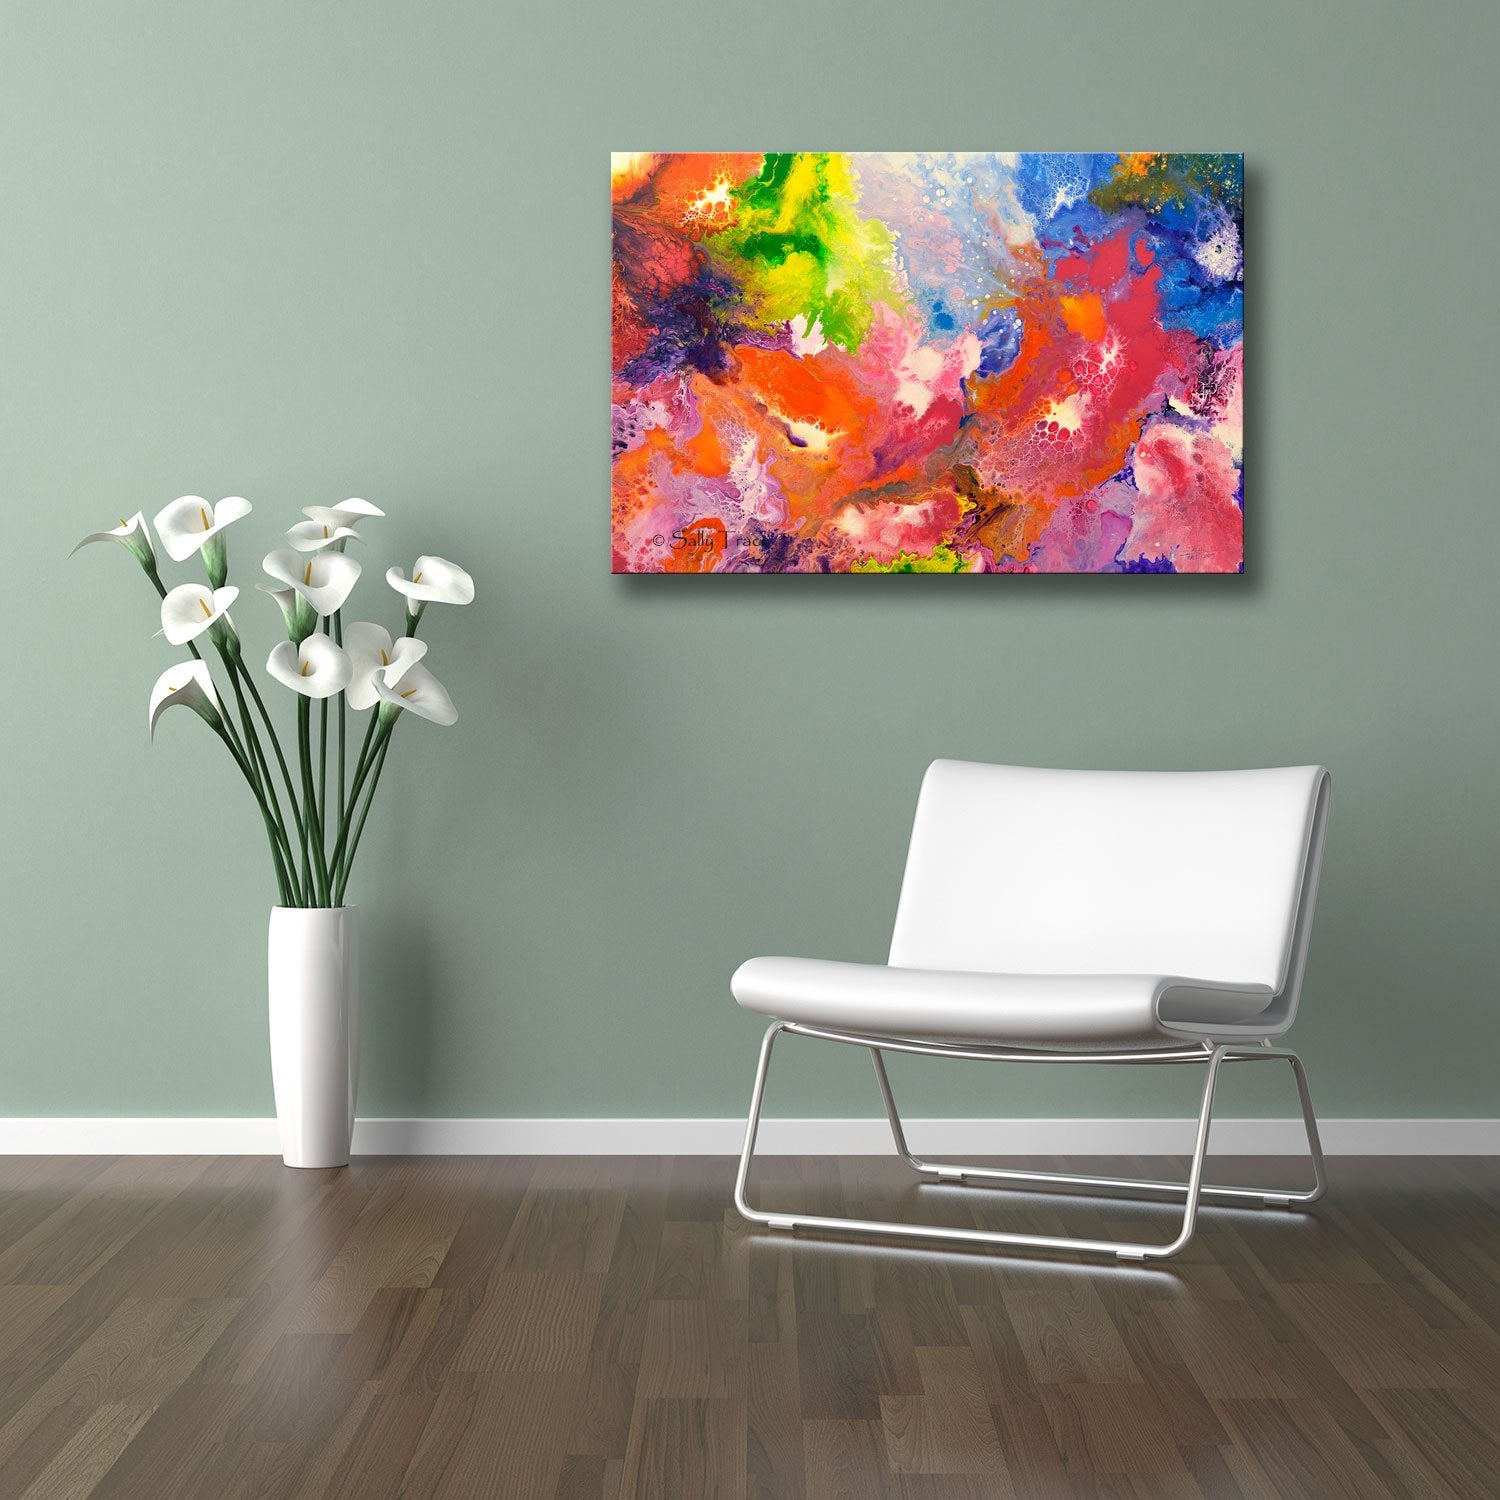 Playful Persuasion, original abstract fluid painting by Sally Trace